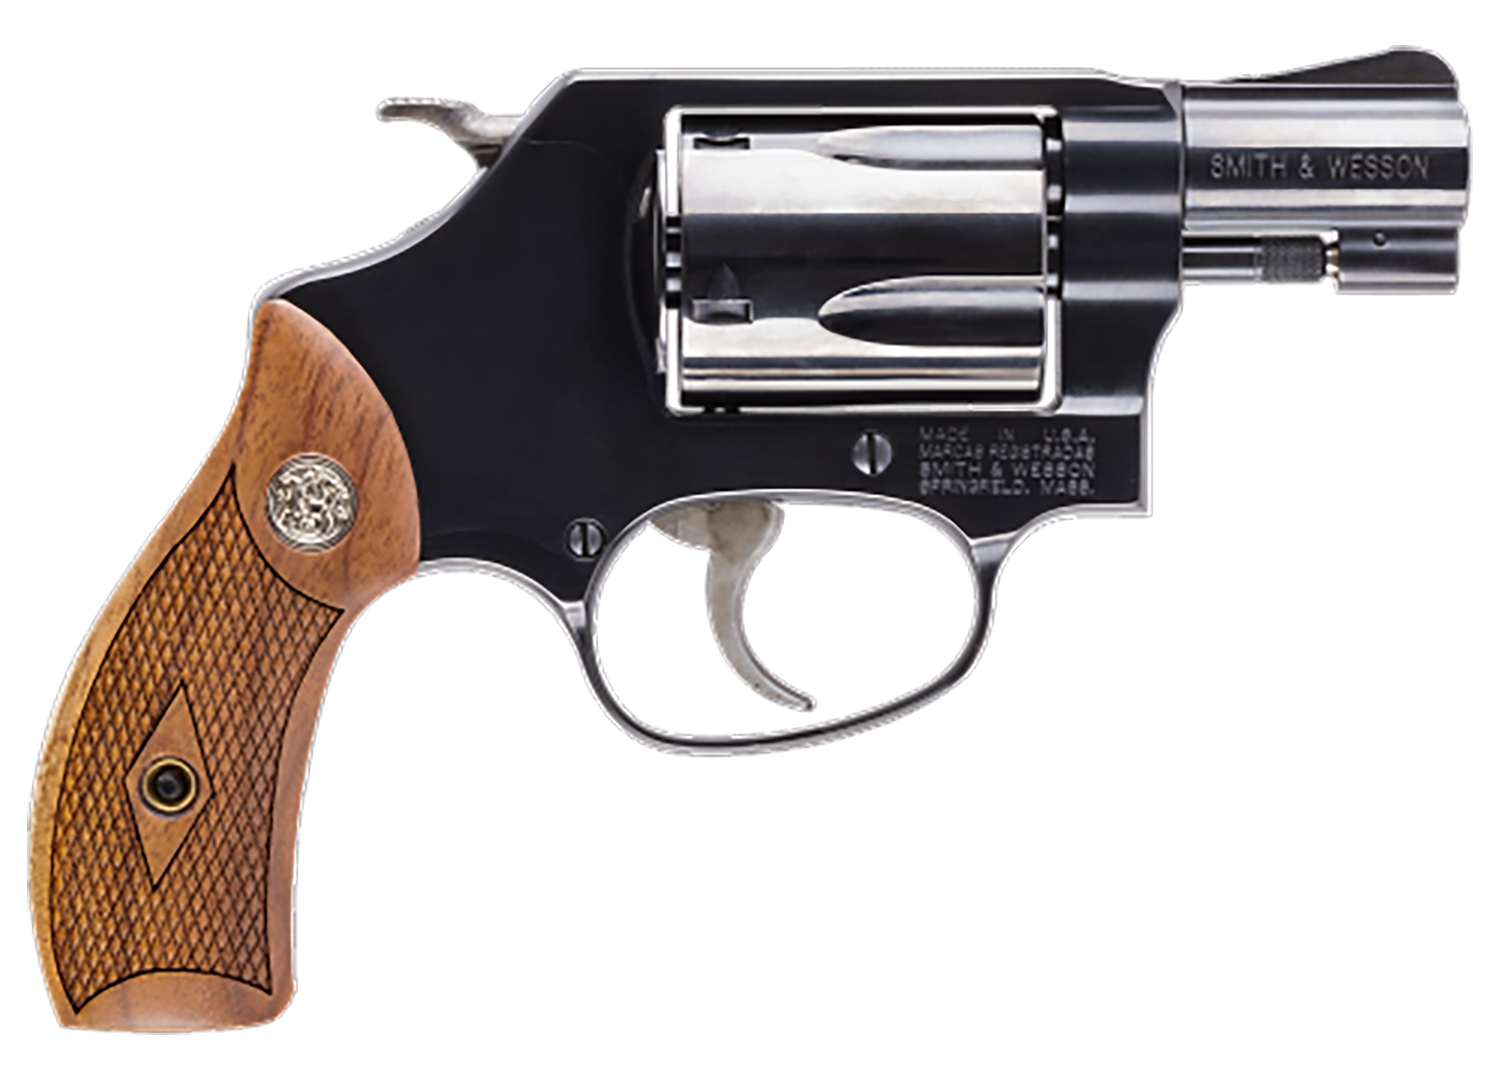 Smith & Wesson 150184 Model 36 Classic 38 S&W Spl +P Blued Carbon Steel  1.88